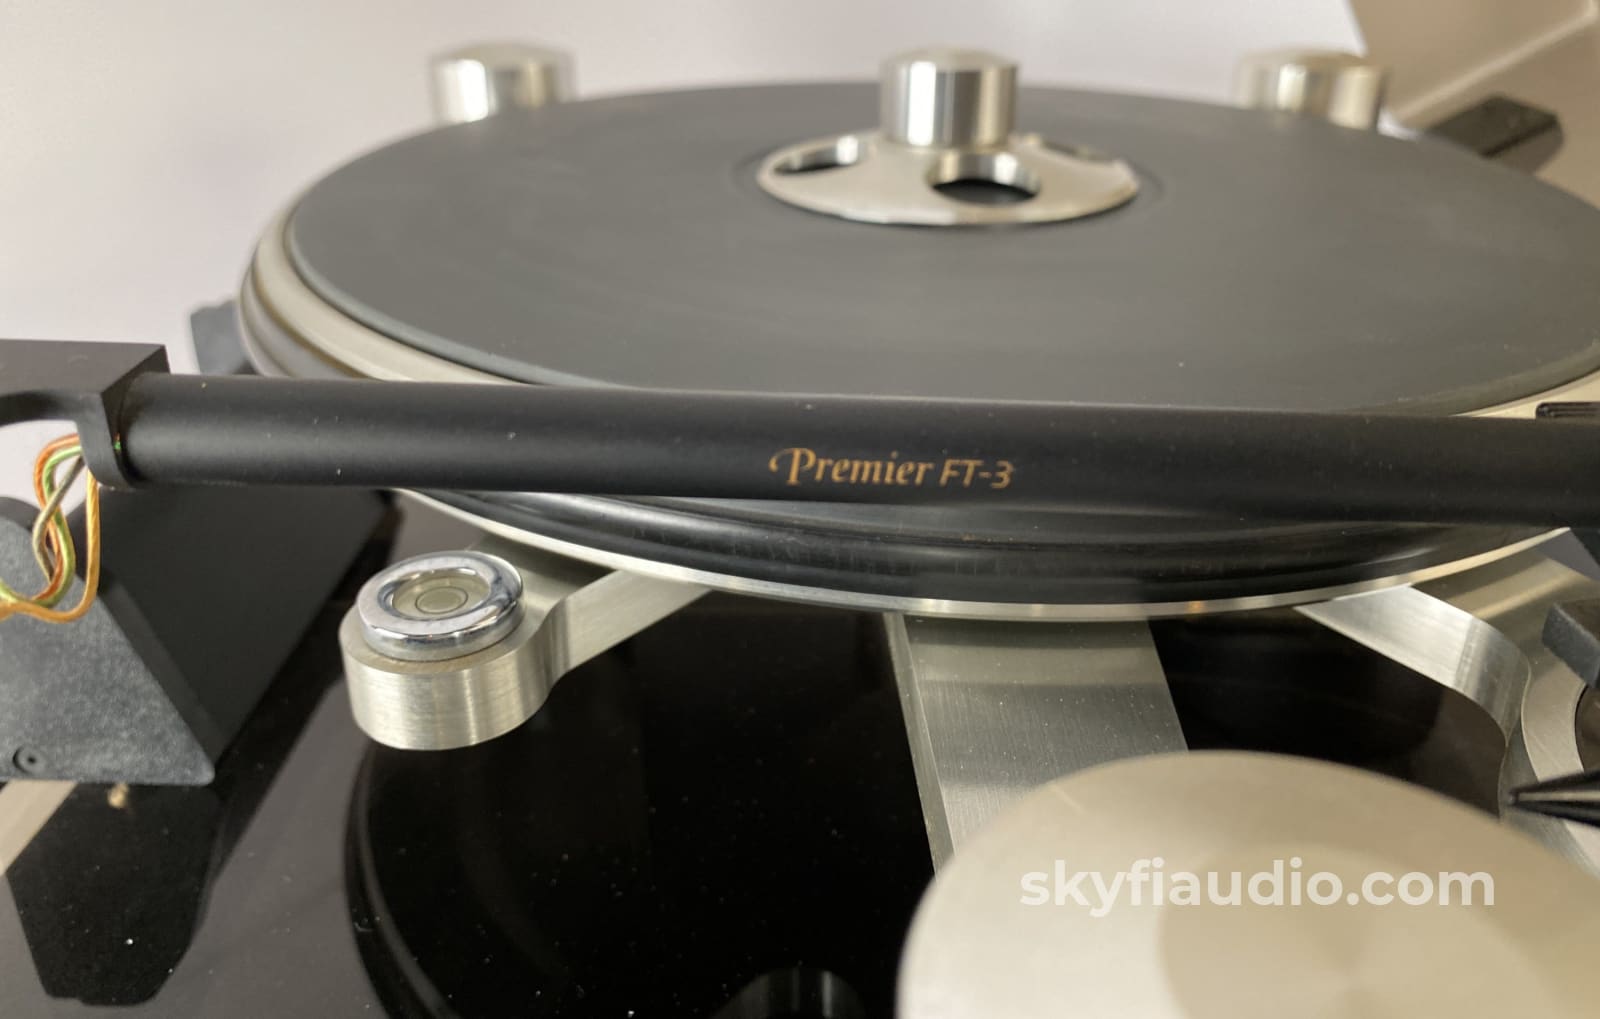 Oracle Delphi Mkiii Turntable With Sumiko Premier Ft-3 Arm And New Cartridge